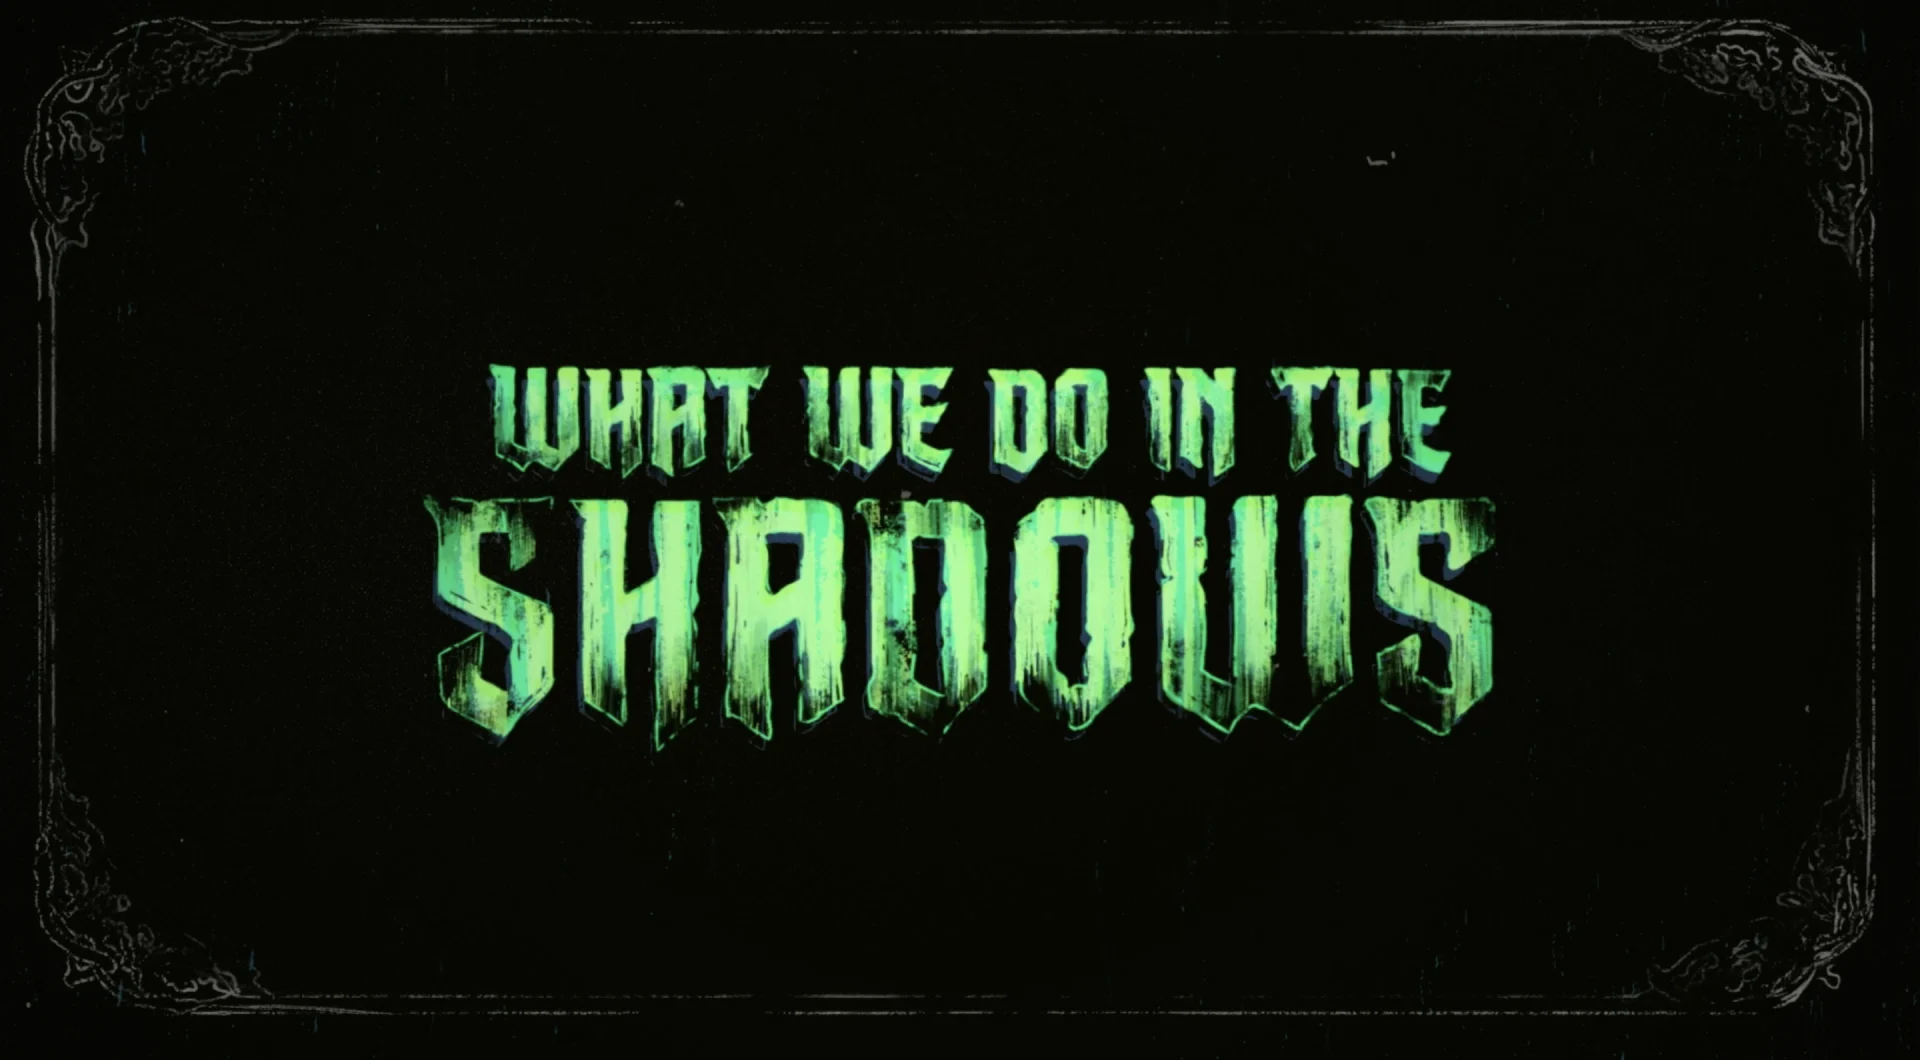 Our show open and promo package approach for What We Do in the Shadows, an FX Original series adapted from the popular mockumentary, took us back in time to the dark ages when vampires may (or may not) have roamed the earth.